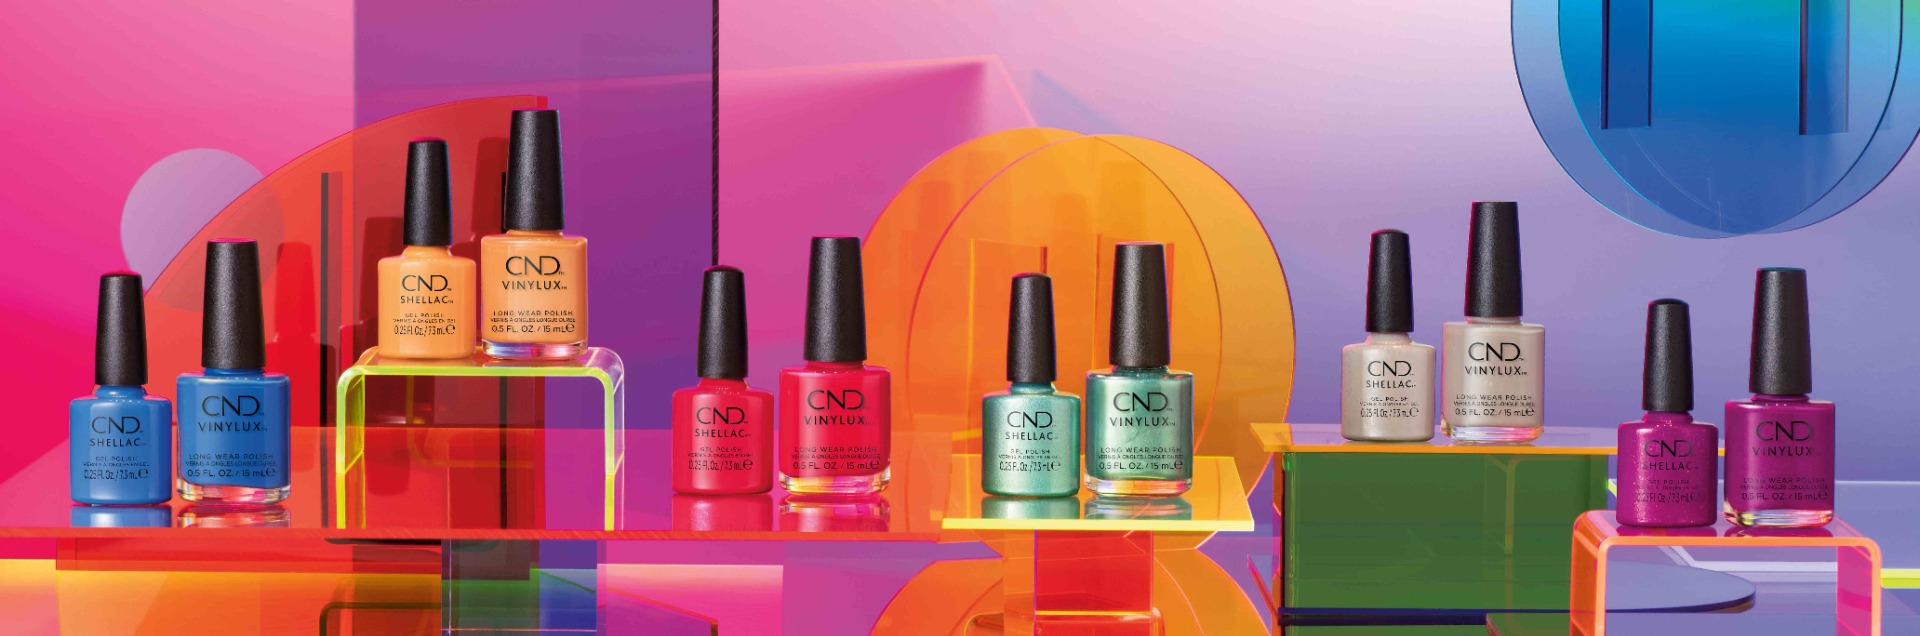 Different colors of CND Shellac bottles on a display